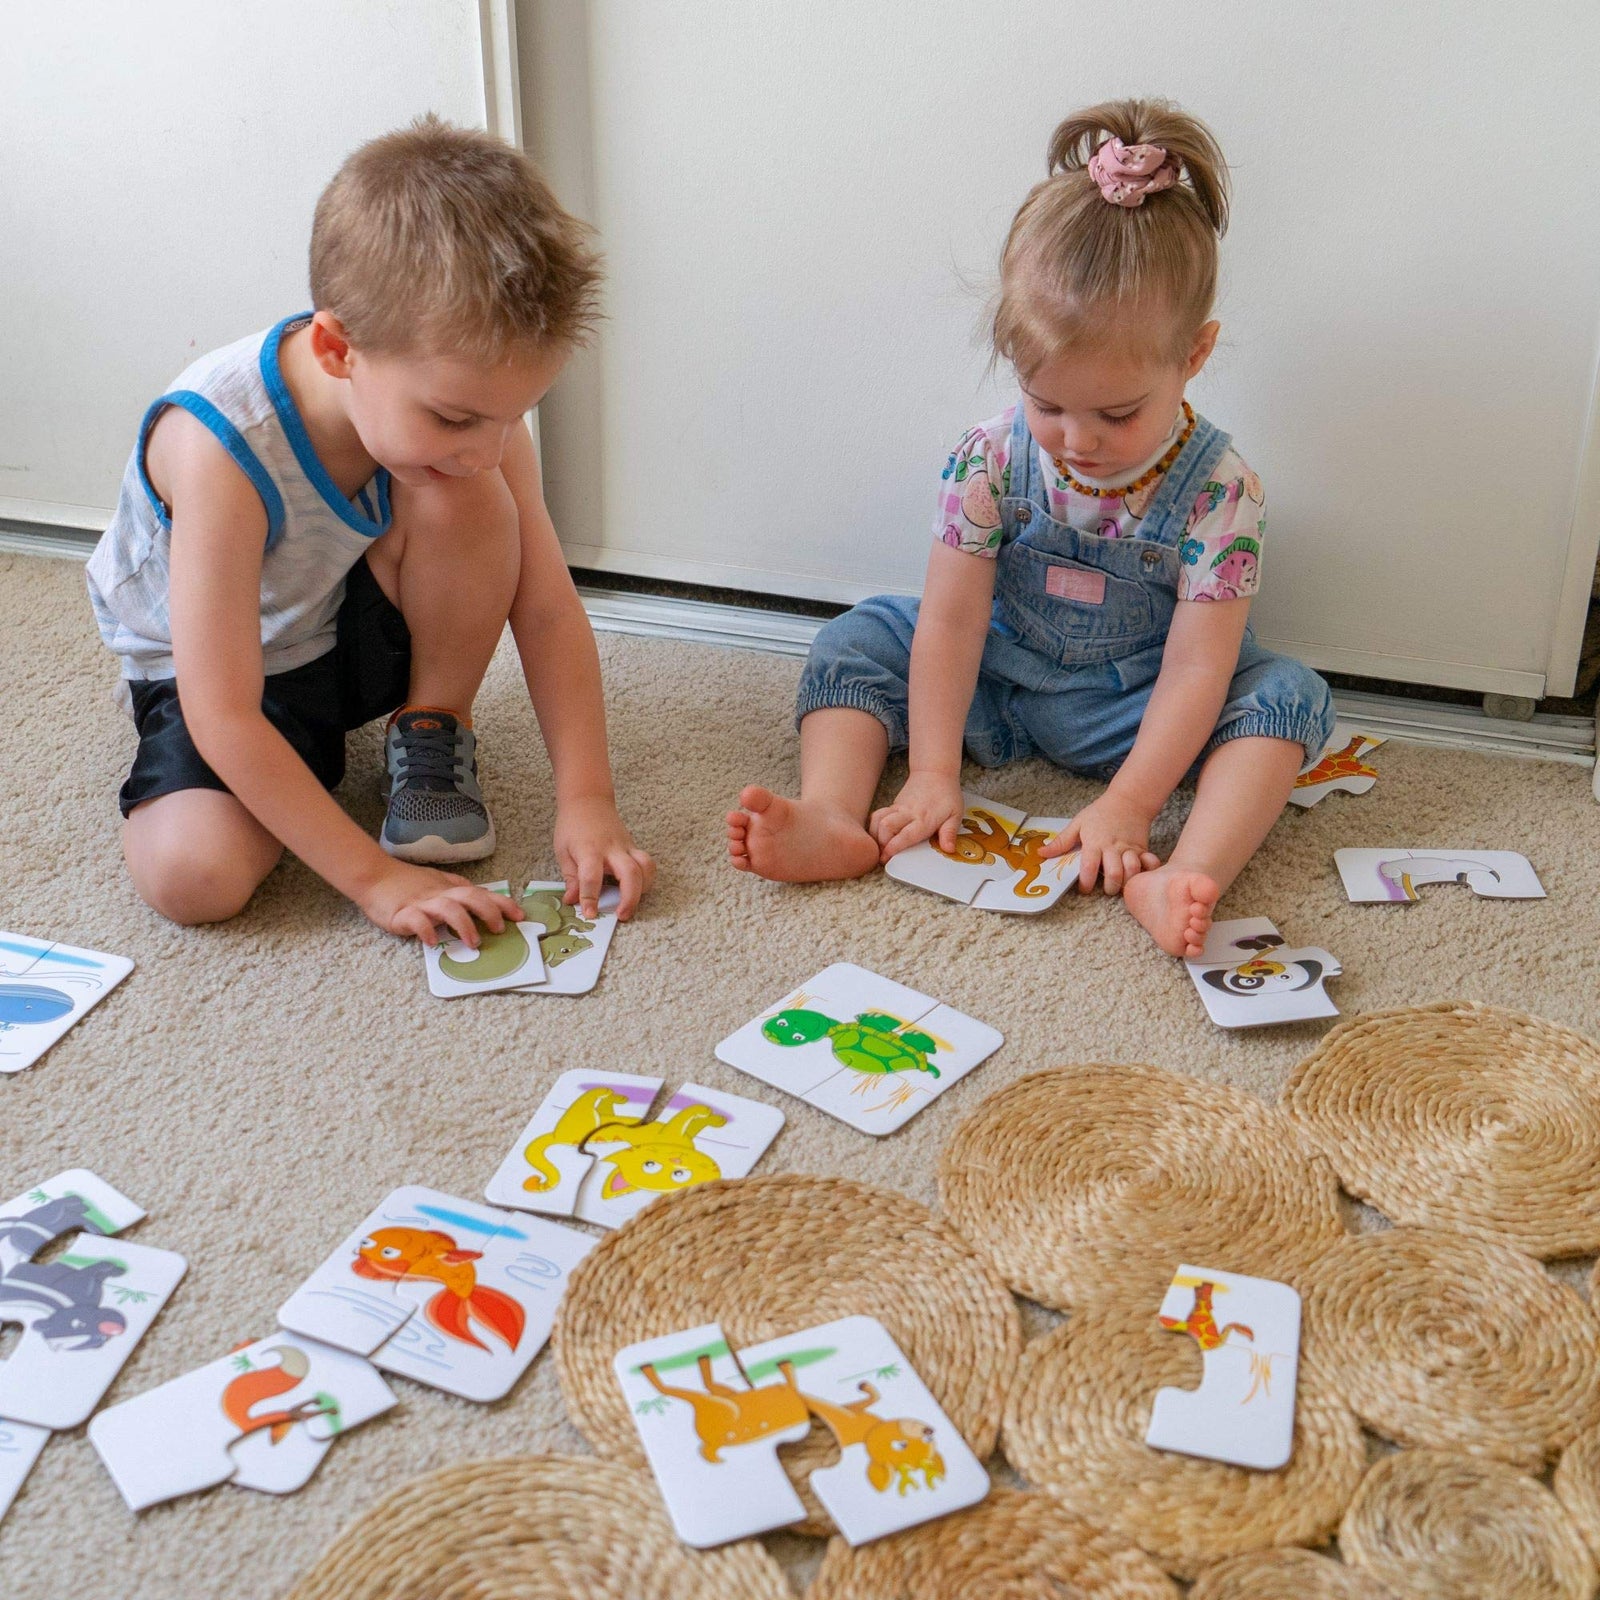 The Learning Journey: My First Match It - Head and Tails - 15 Piece Self-Correcting Animal Matching Puzzles - Learning Toys for Toddlers 1-3 - Award Winning Toys